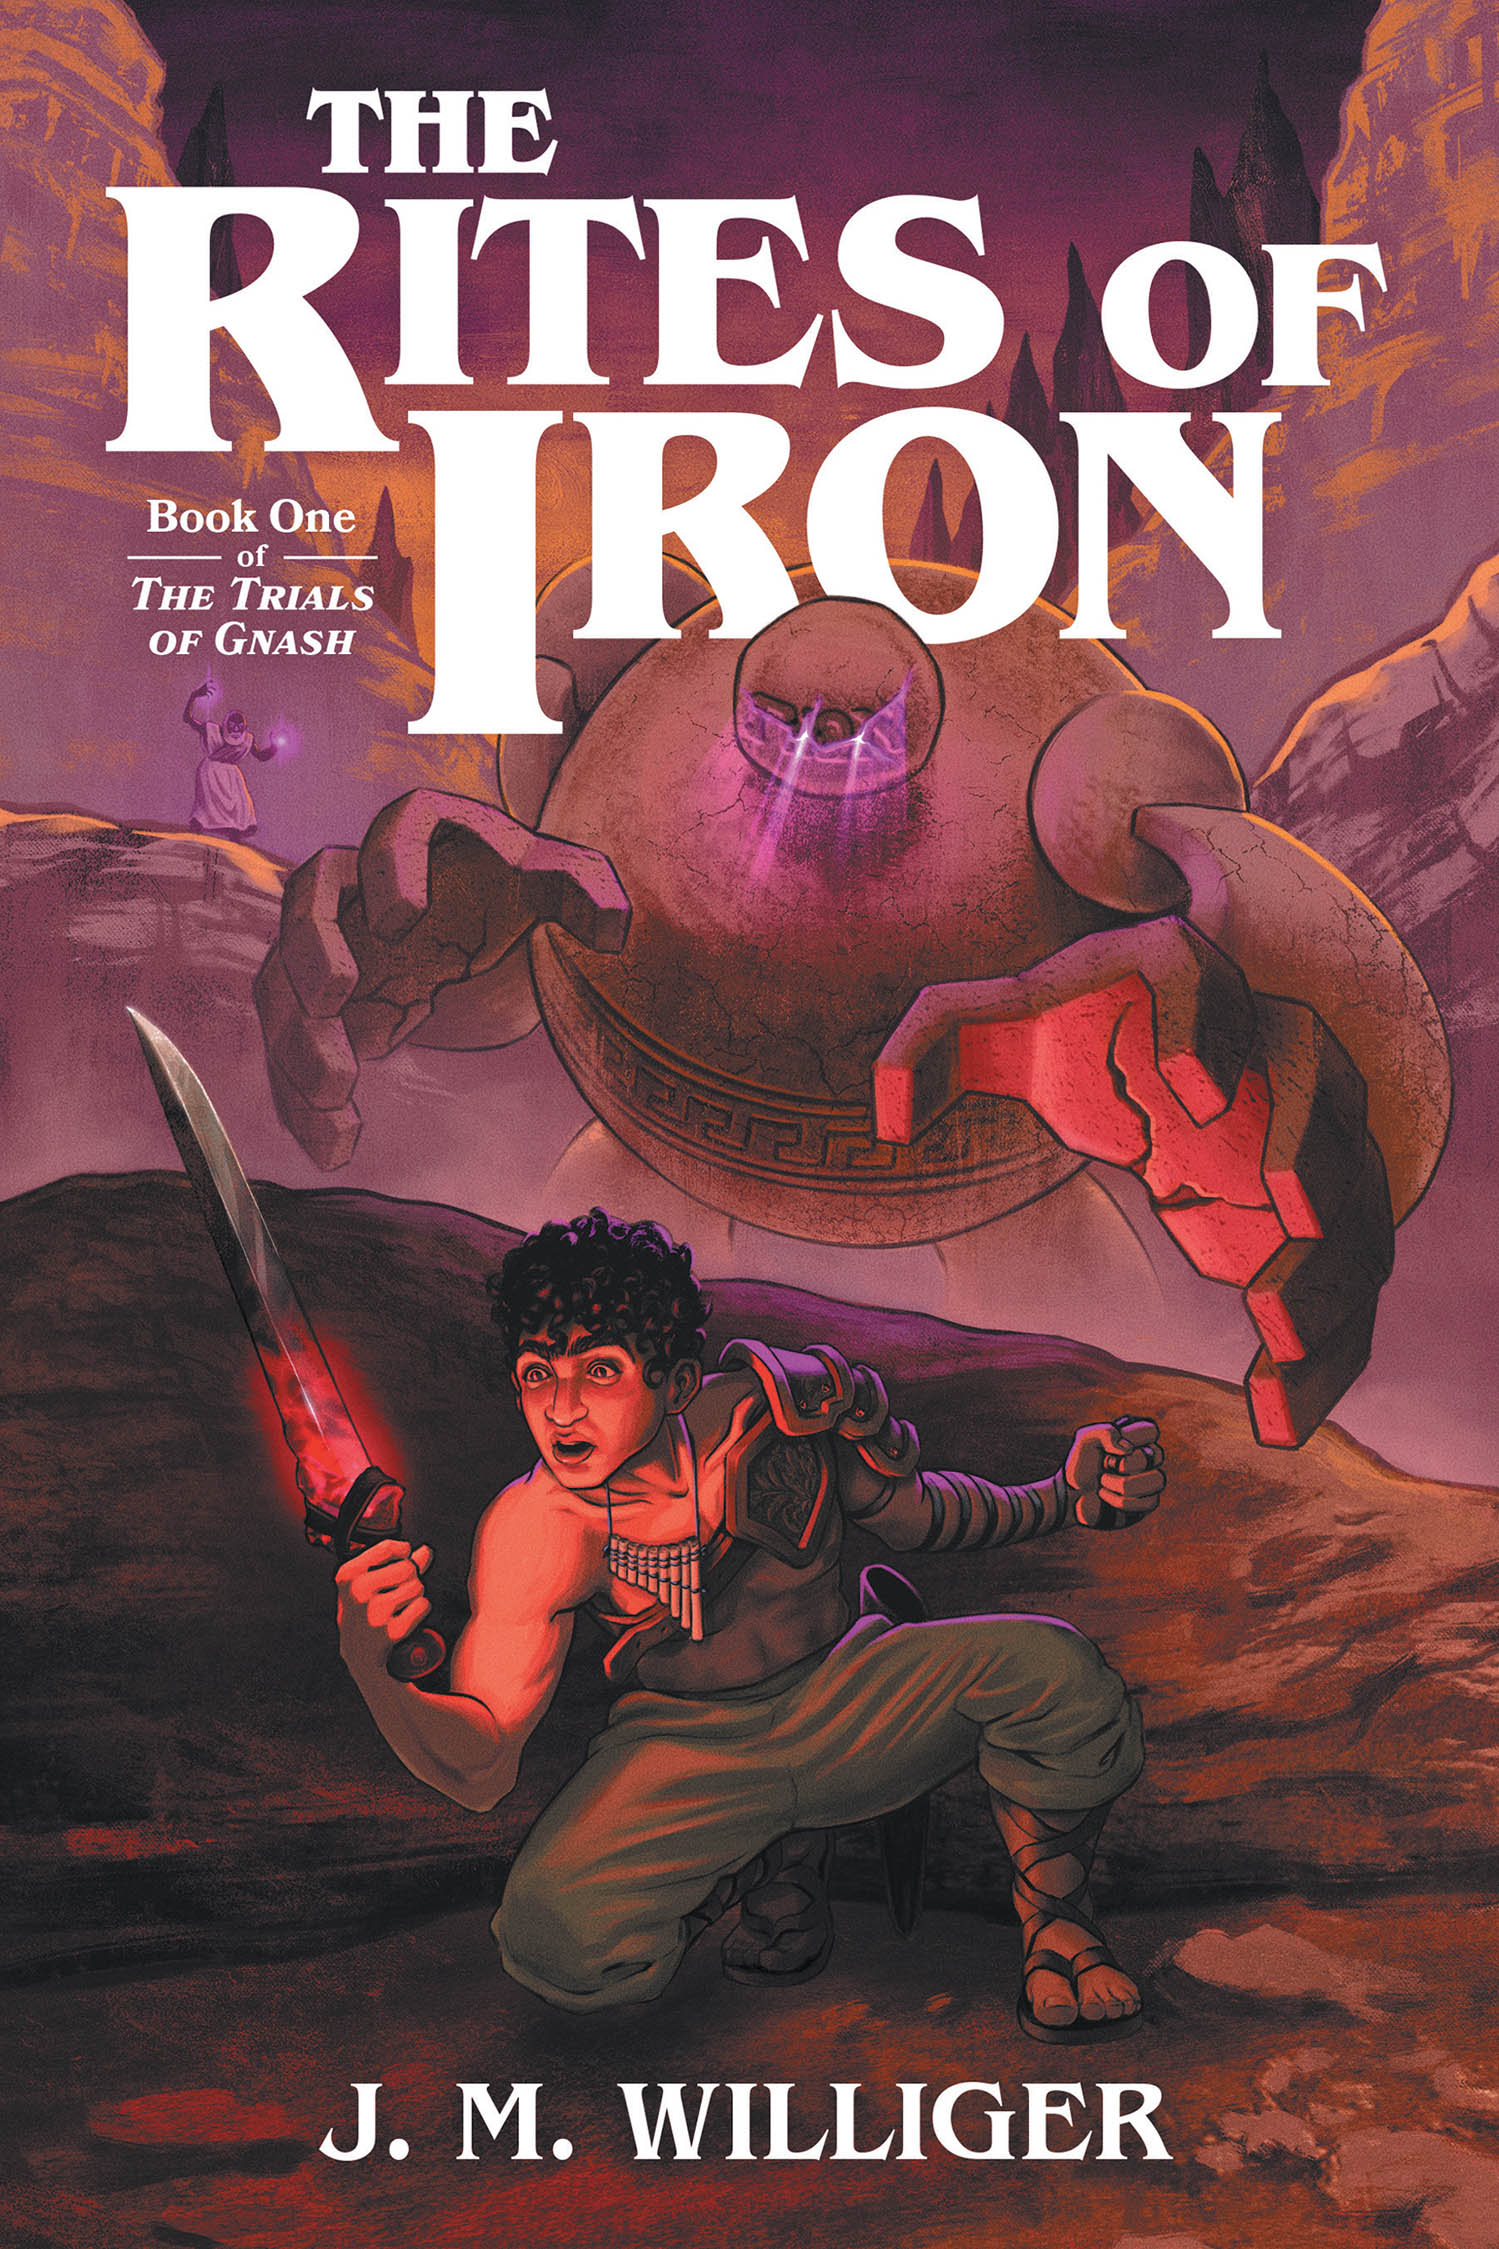 Author J. M. Williger’s New Book “The Rites of Iron: Book One of The Trials of Gnash” is a Thrilling Coming-of-Age Fantasy Novel About a Young Warrior in a Nomadic Tribe